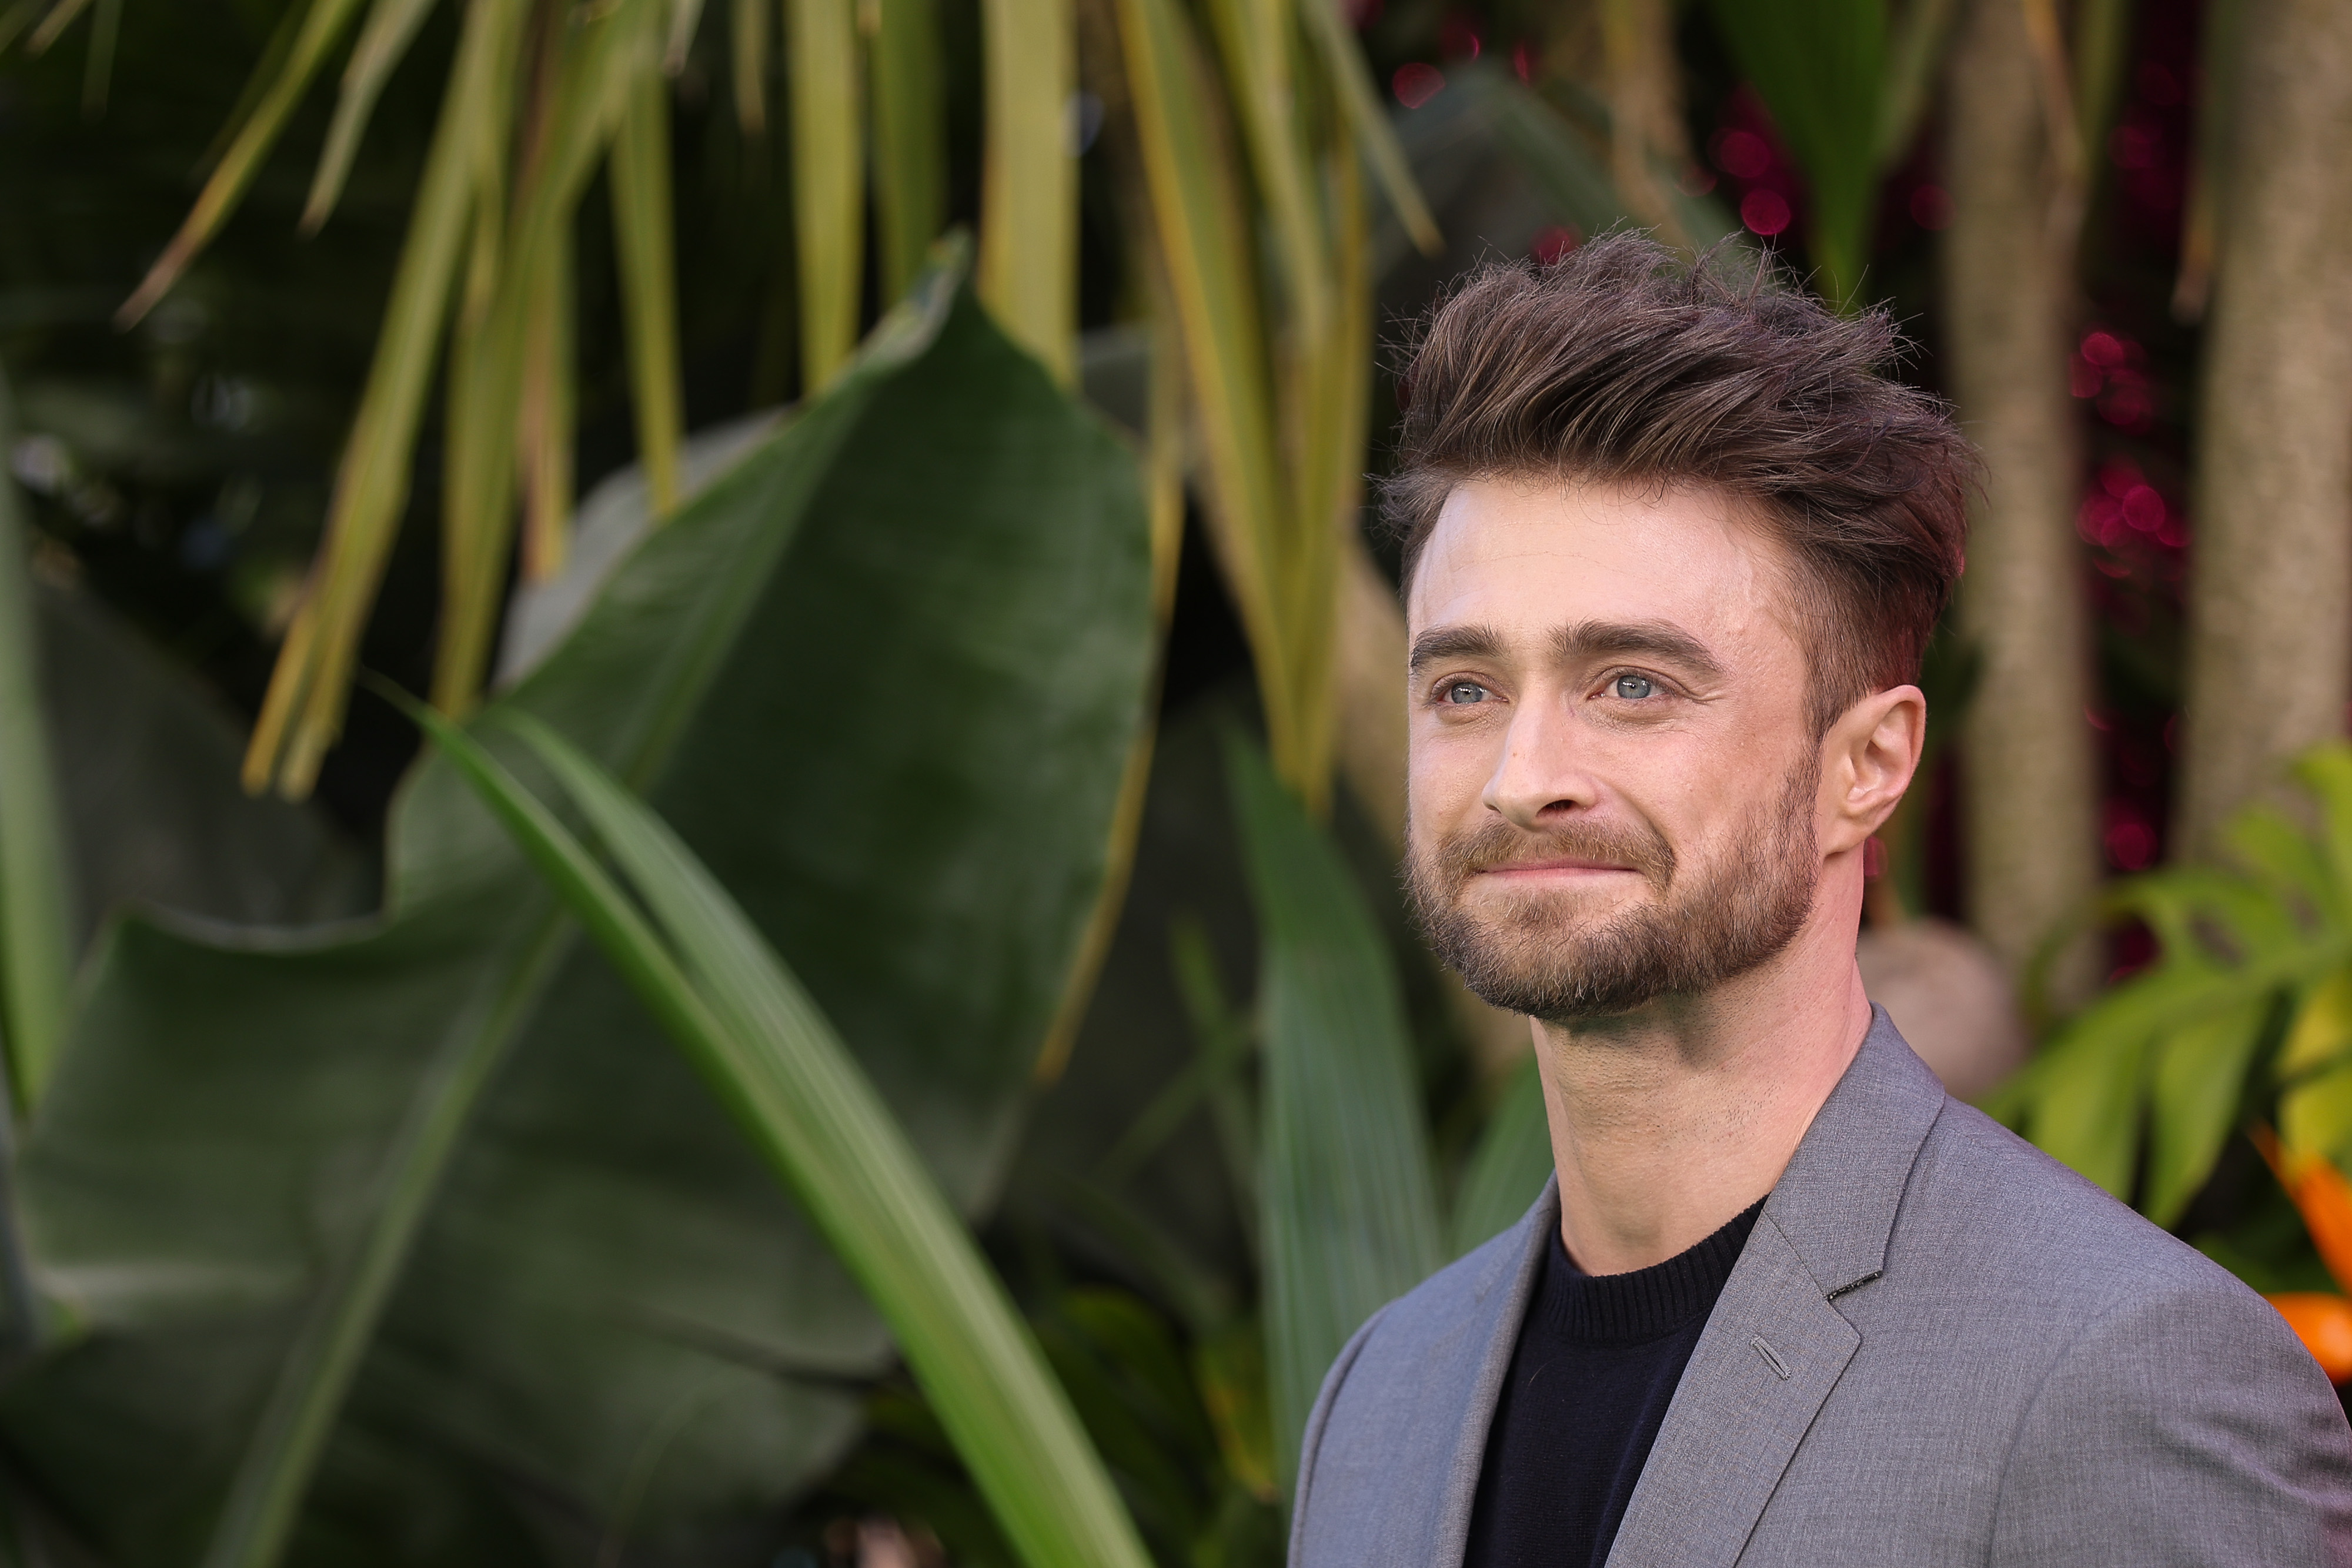 Harry Potter actor Daniel Radcliffe attends a UK screening for the movie The Lost City